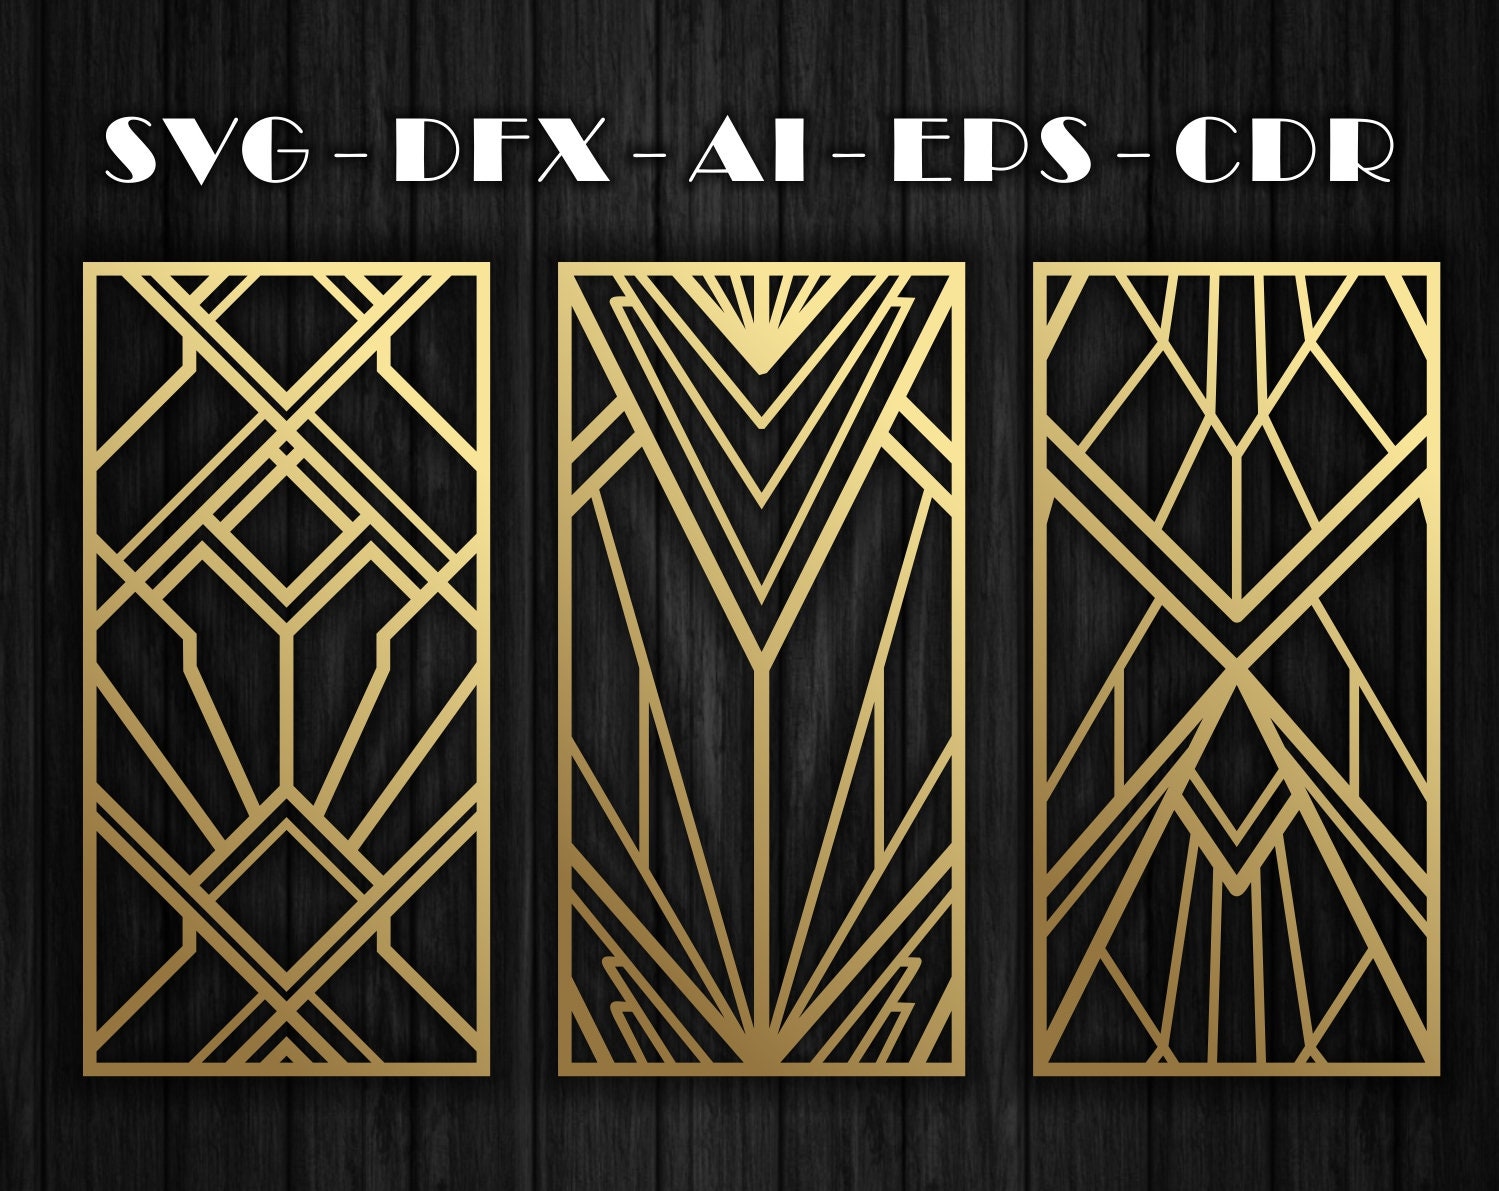 24 Patterns of Art Deco for Decorative Panel, Art Deco Wall Art CNC Laser  Cutting File Dxf, Svg, Jpg, Cdr, Eps Vector Files. -  Canada